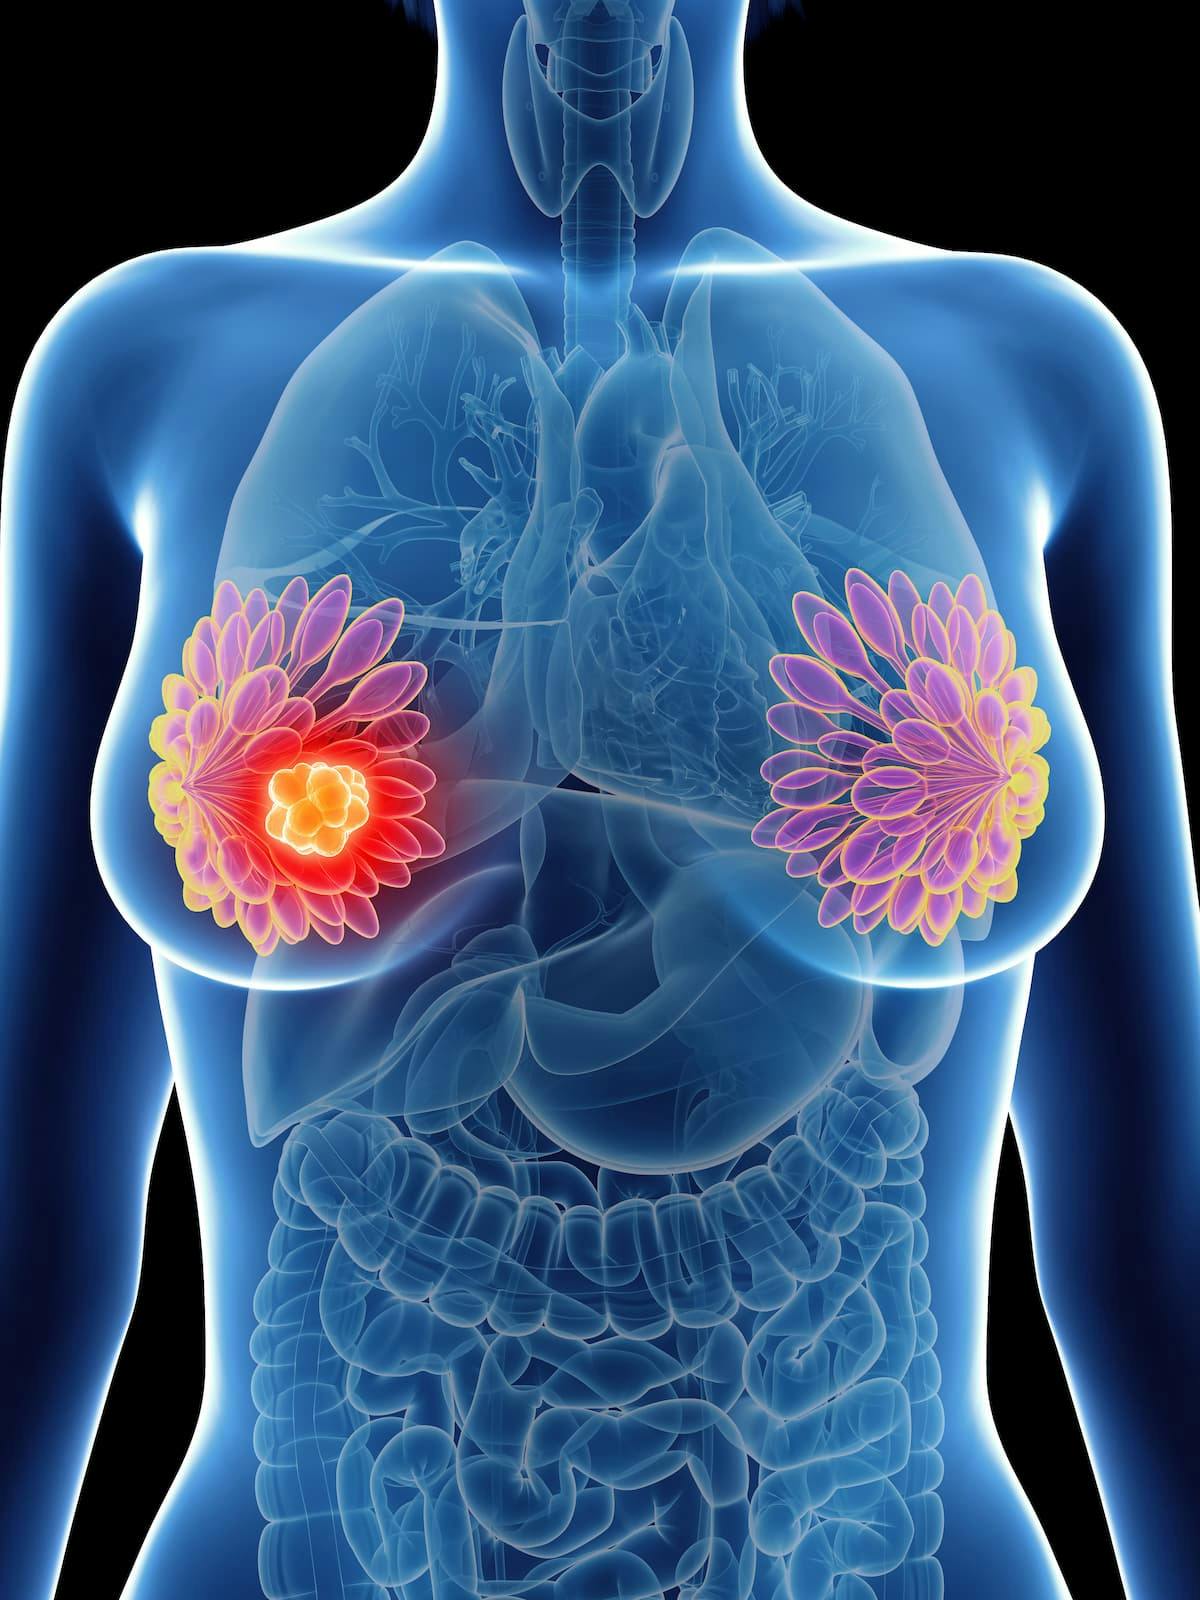 Latin American patients appear more likely to be diagnosed with aggressive early-stage breast cancer based on factors including metabolics and genetics, according to findings from the FLEX study.